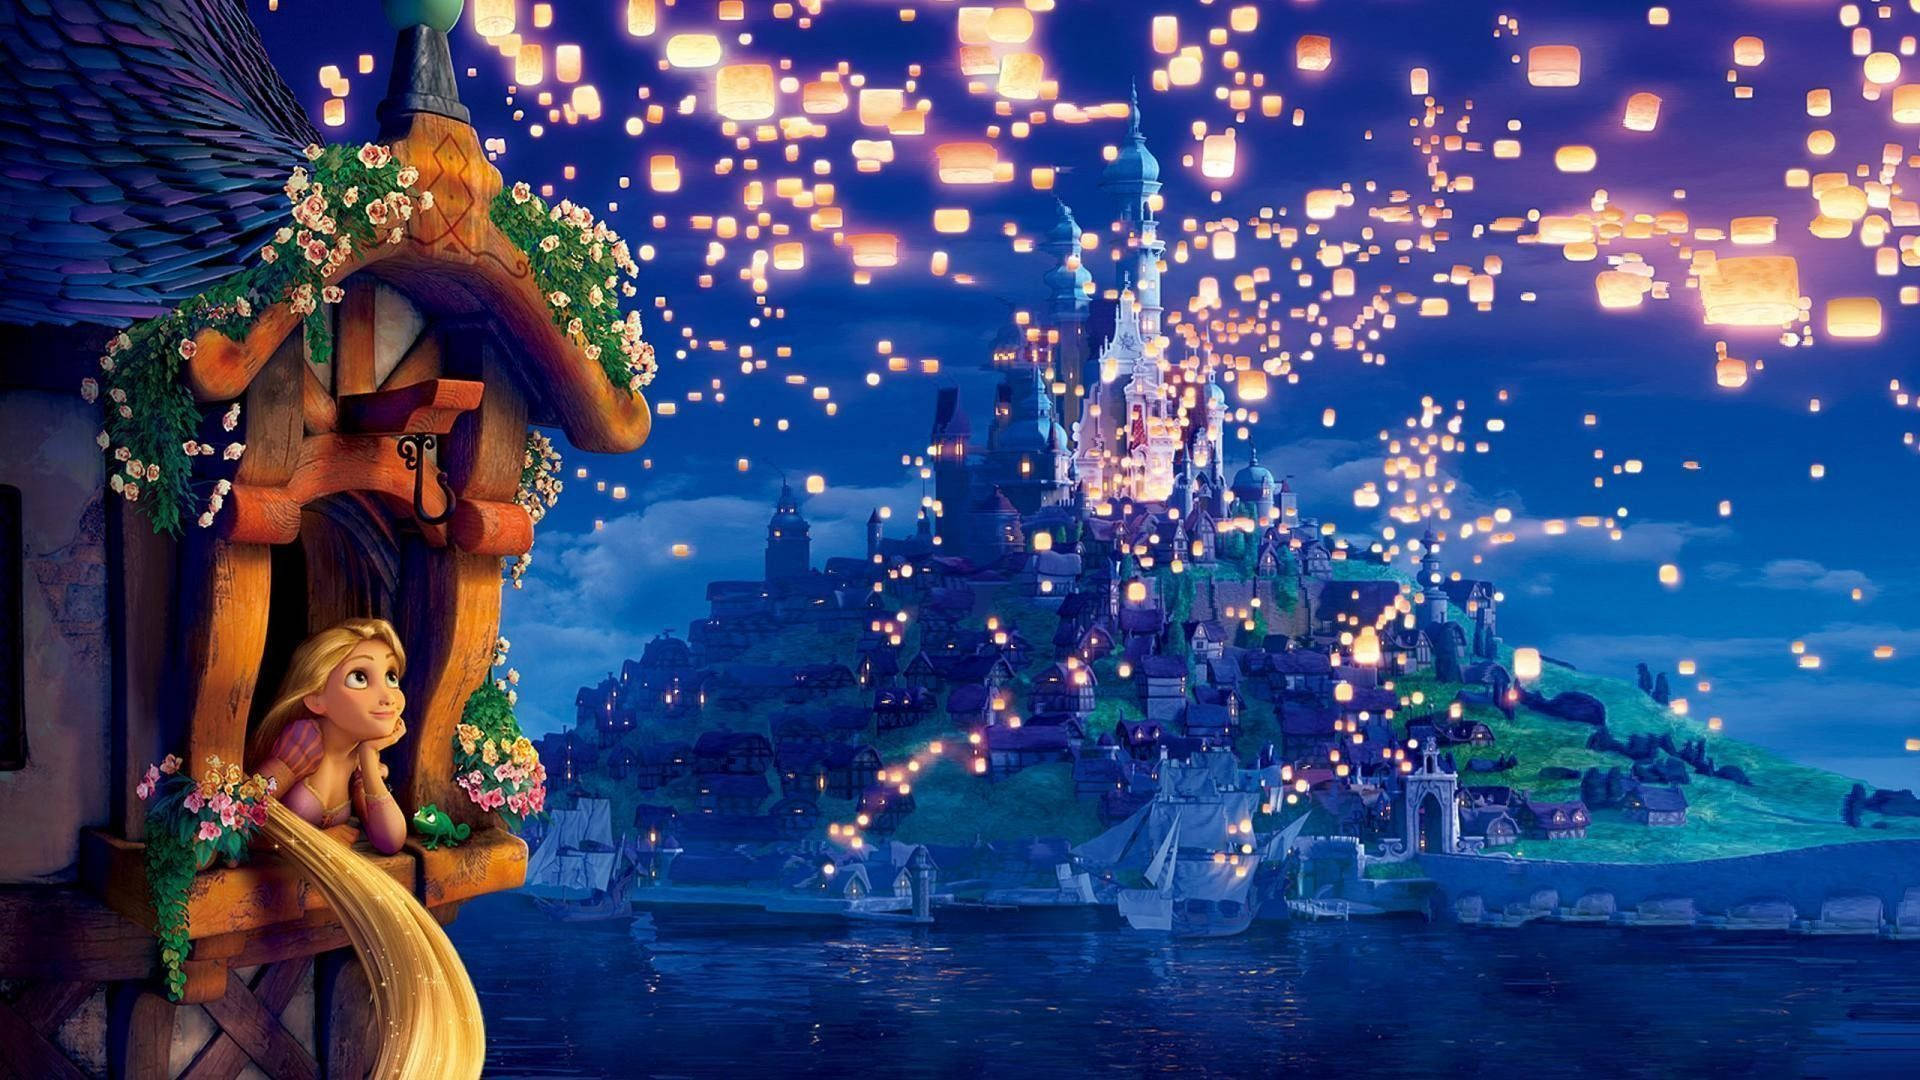 Tangled Rapunzel By The Window Wallpaper